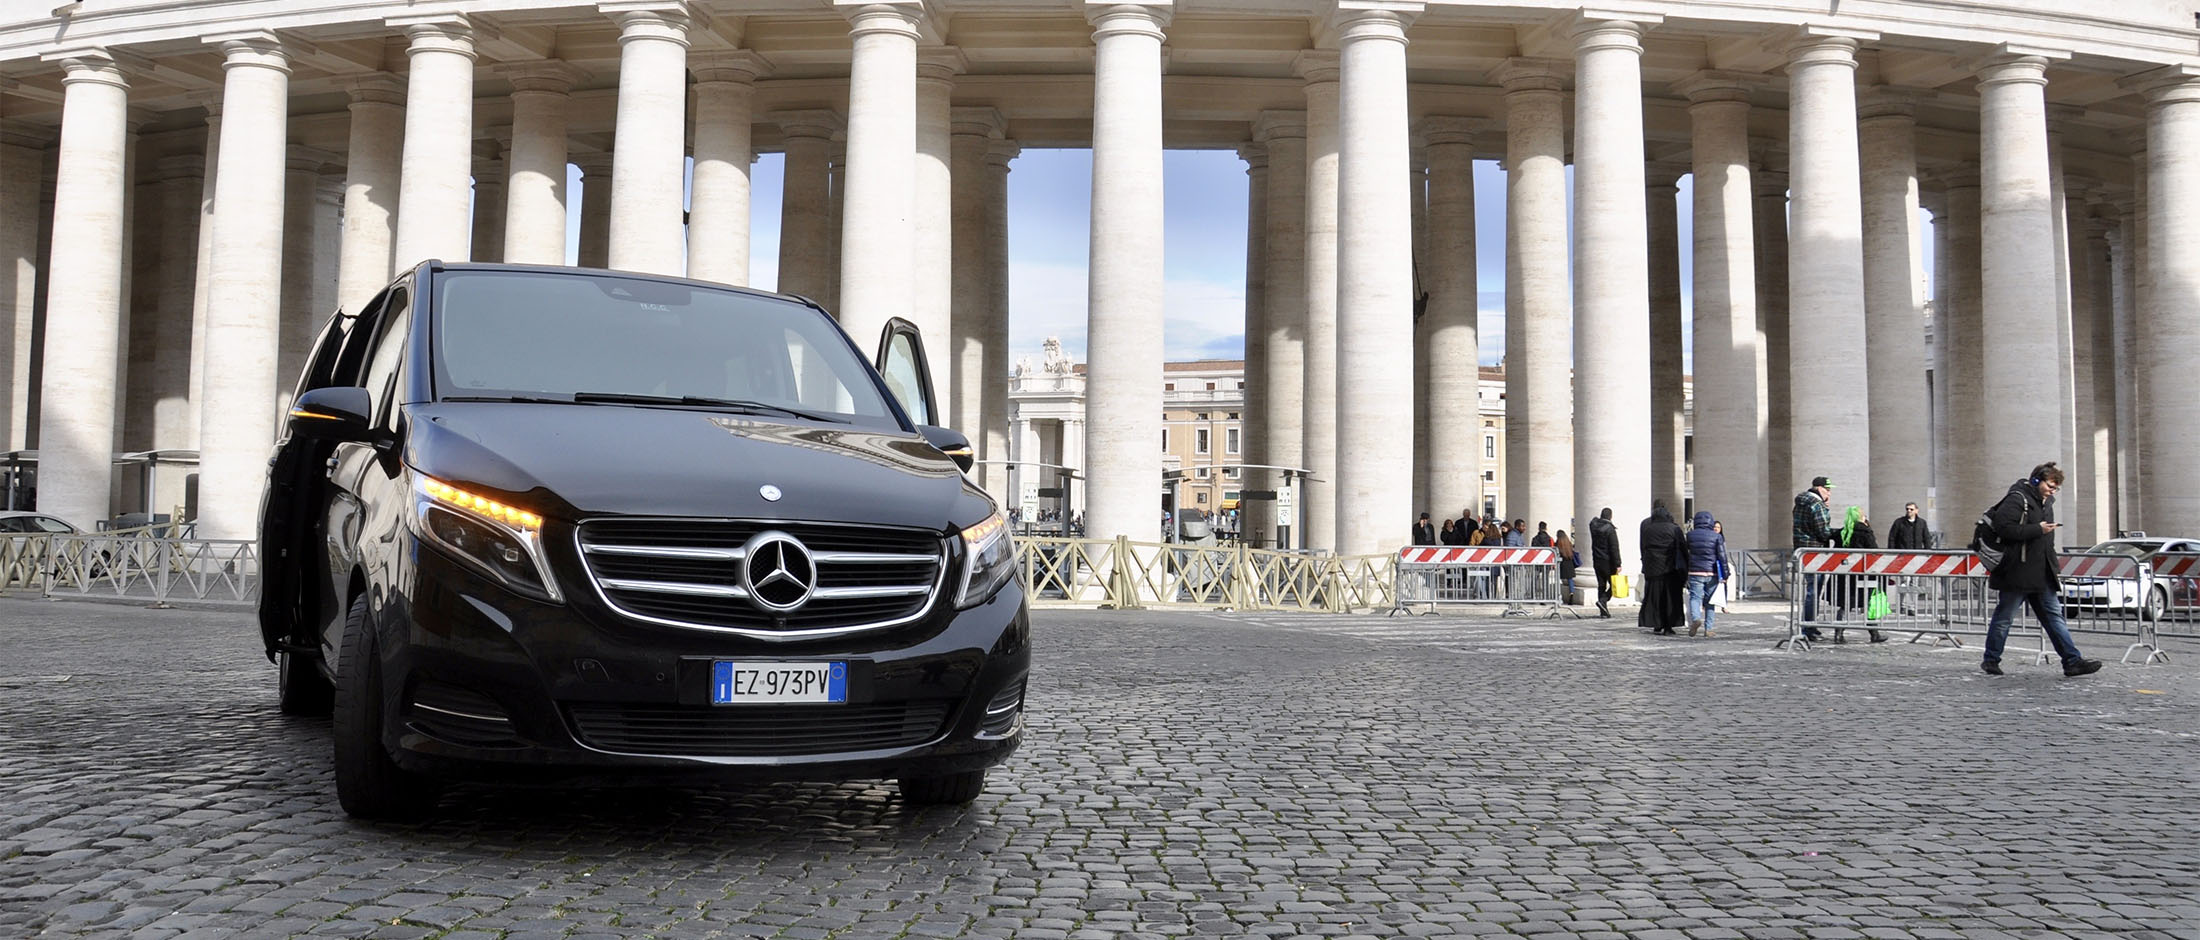 Need a <strong>Rome private car transfer</strong> and personal driver? We can offer <strong>private Rome Airport transfers</strong> from and to <strong>Fiumicino airport</strong> and <strong>Ciampino airport</strong> as well as <strong>Civitavecchia cruise port</strong>. Explore the city on a private tour of Rome with your own personal chauffeur or get out of Rome and explore nearby Tivoli. Travel in style and comfort in our luxurious Mercedes van.